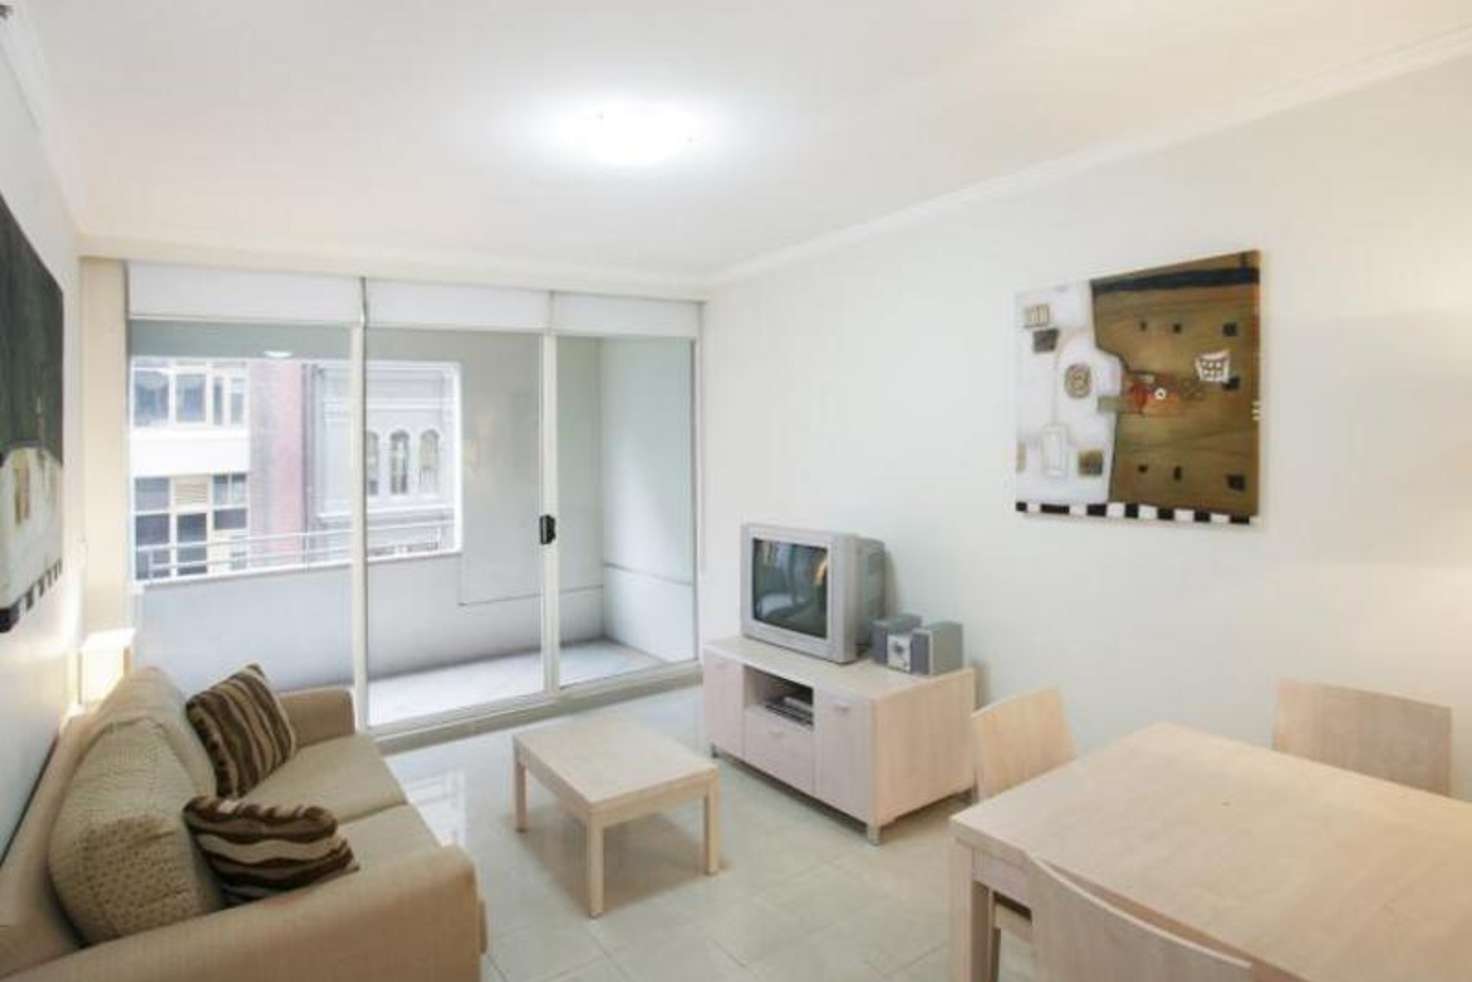 Main view of Homely apartment listing, 43/361 Kent St, Sydney NSW 2000